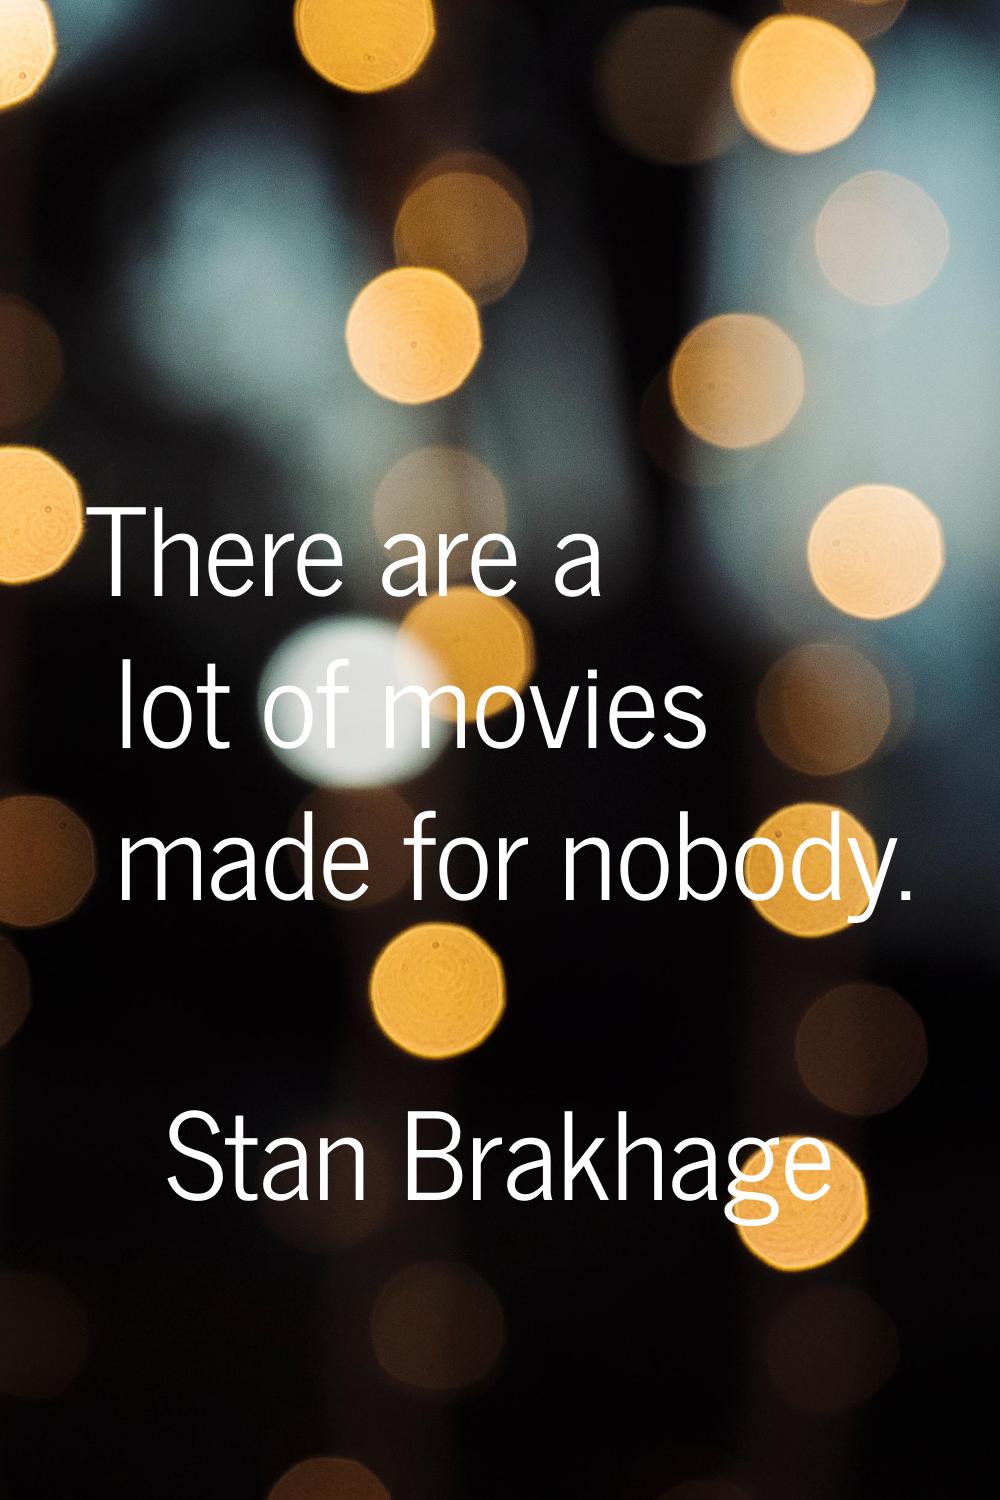 There are a lot of movies made for nobody.